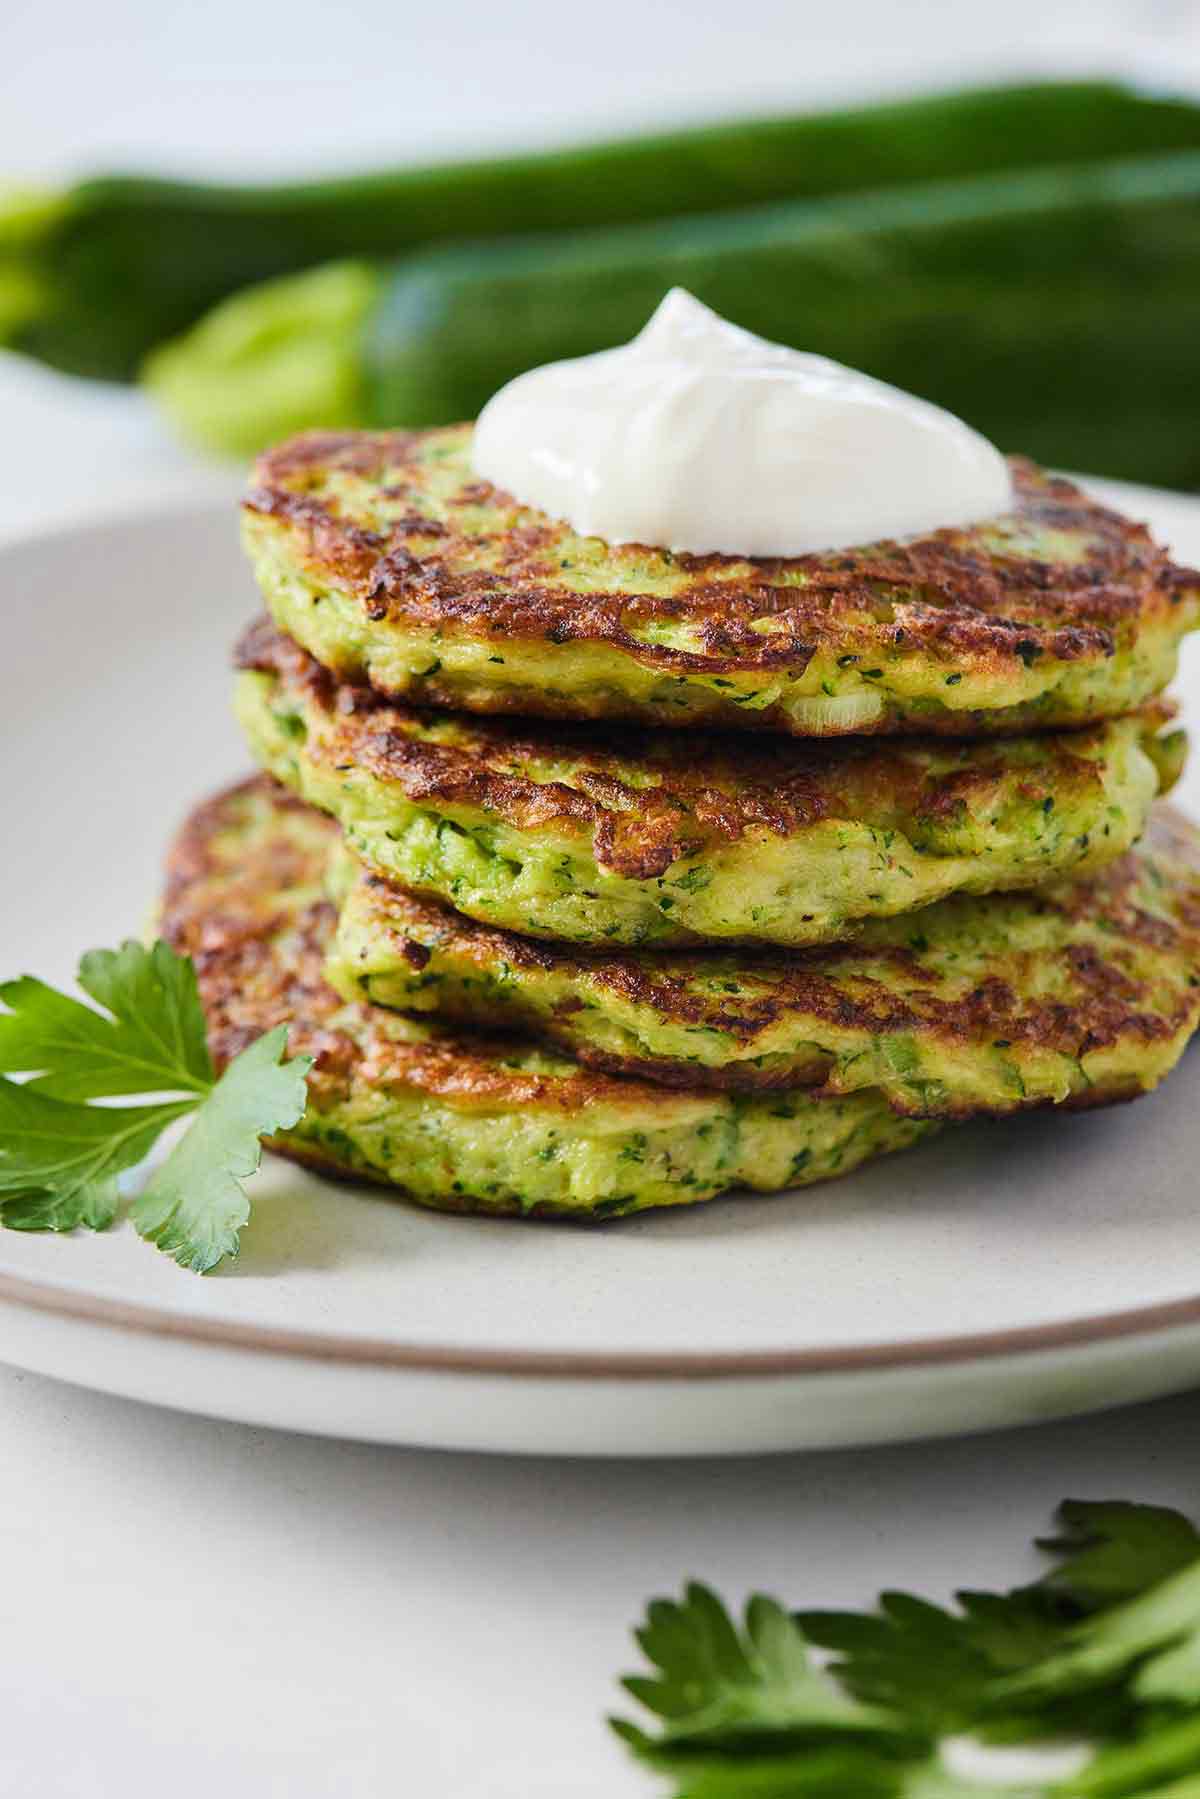 A plate of zucchini fritters with sour cream on top and some zucchinis in the background, out of focus.